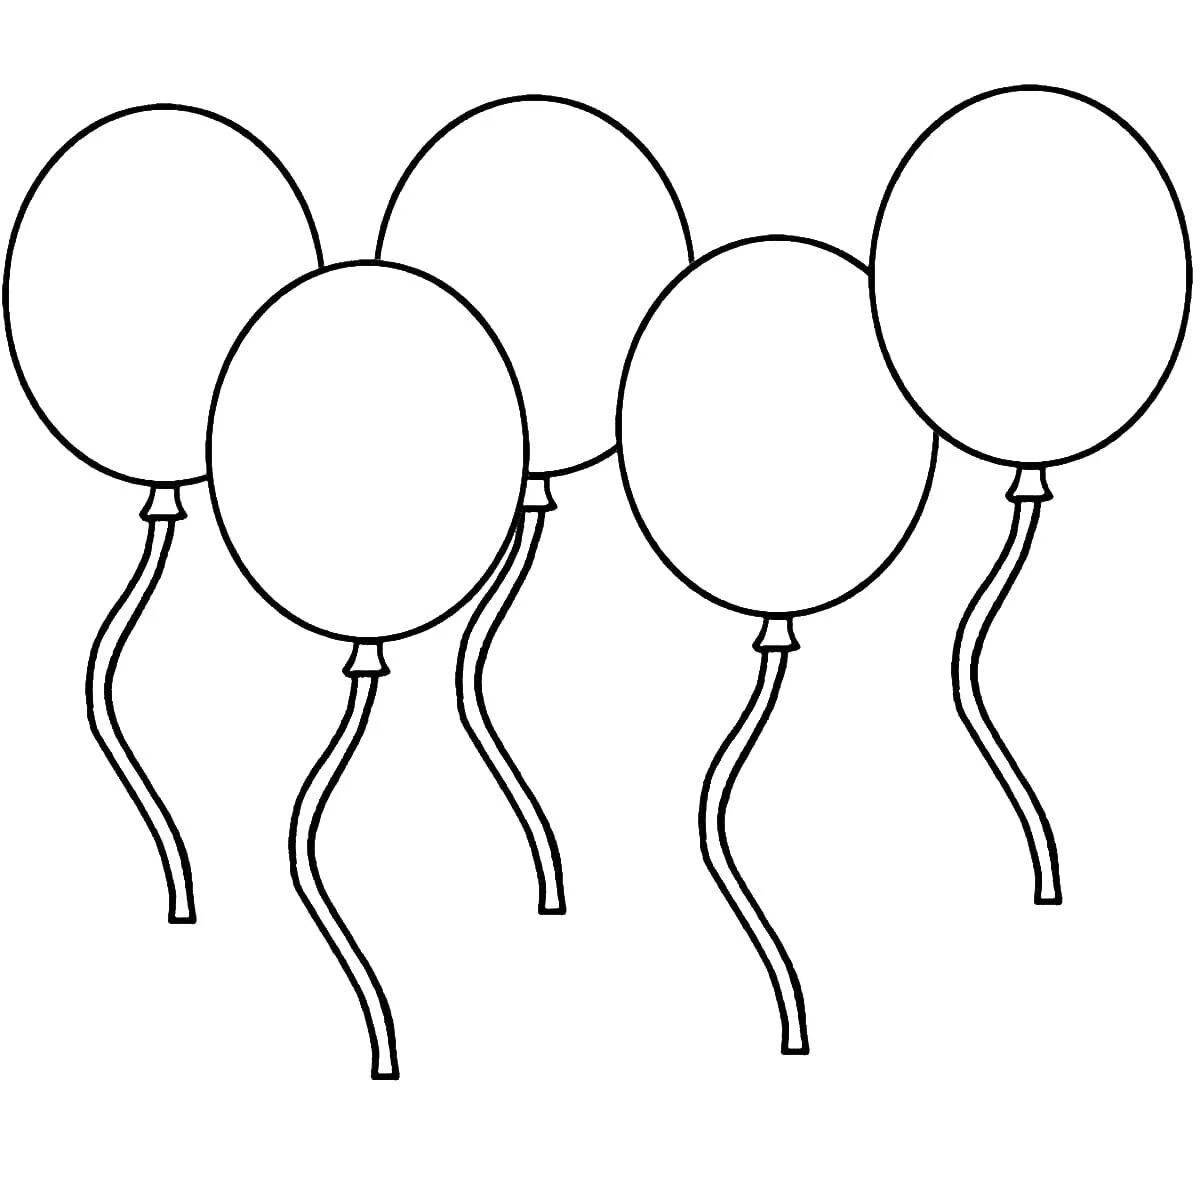 Amazing balloon coloring page